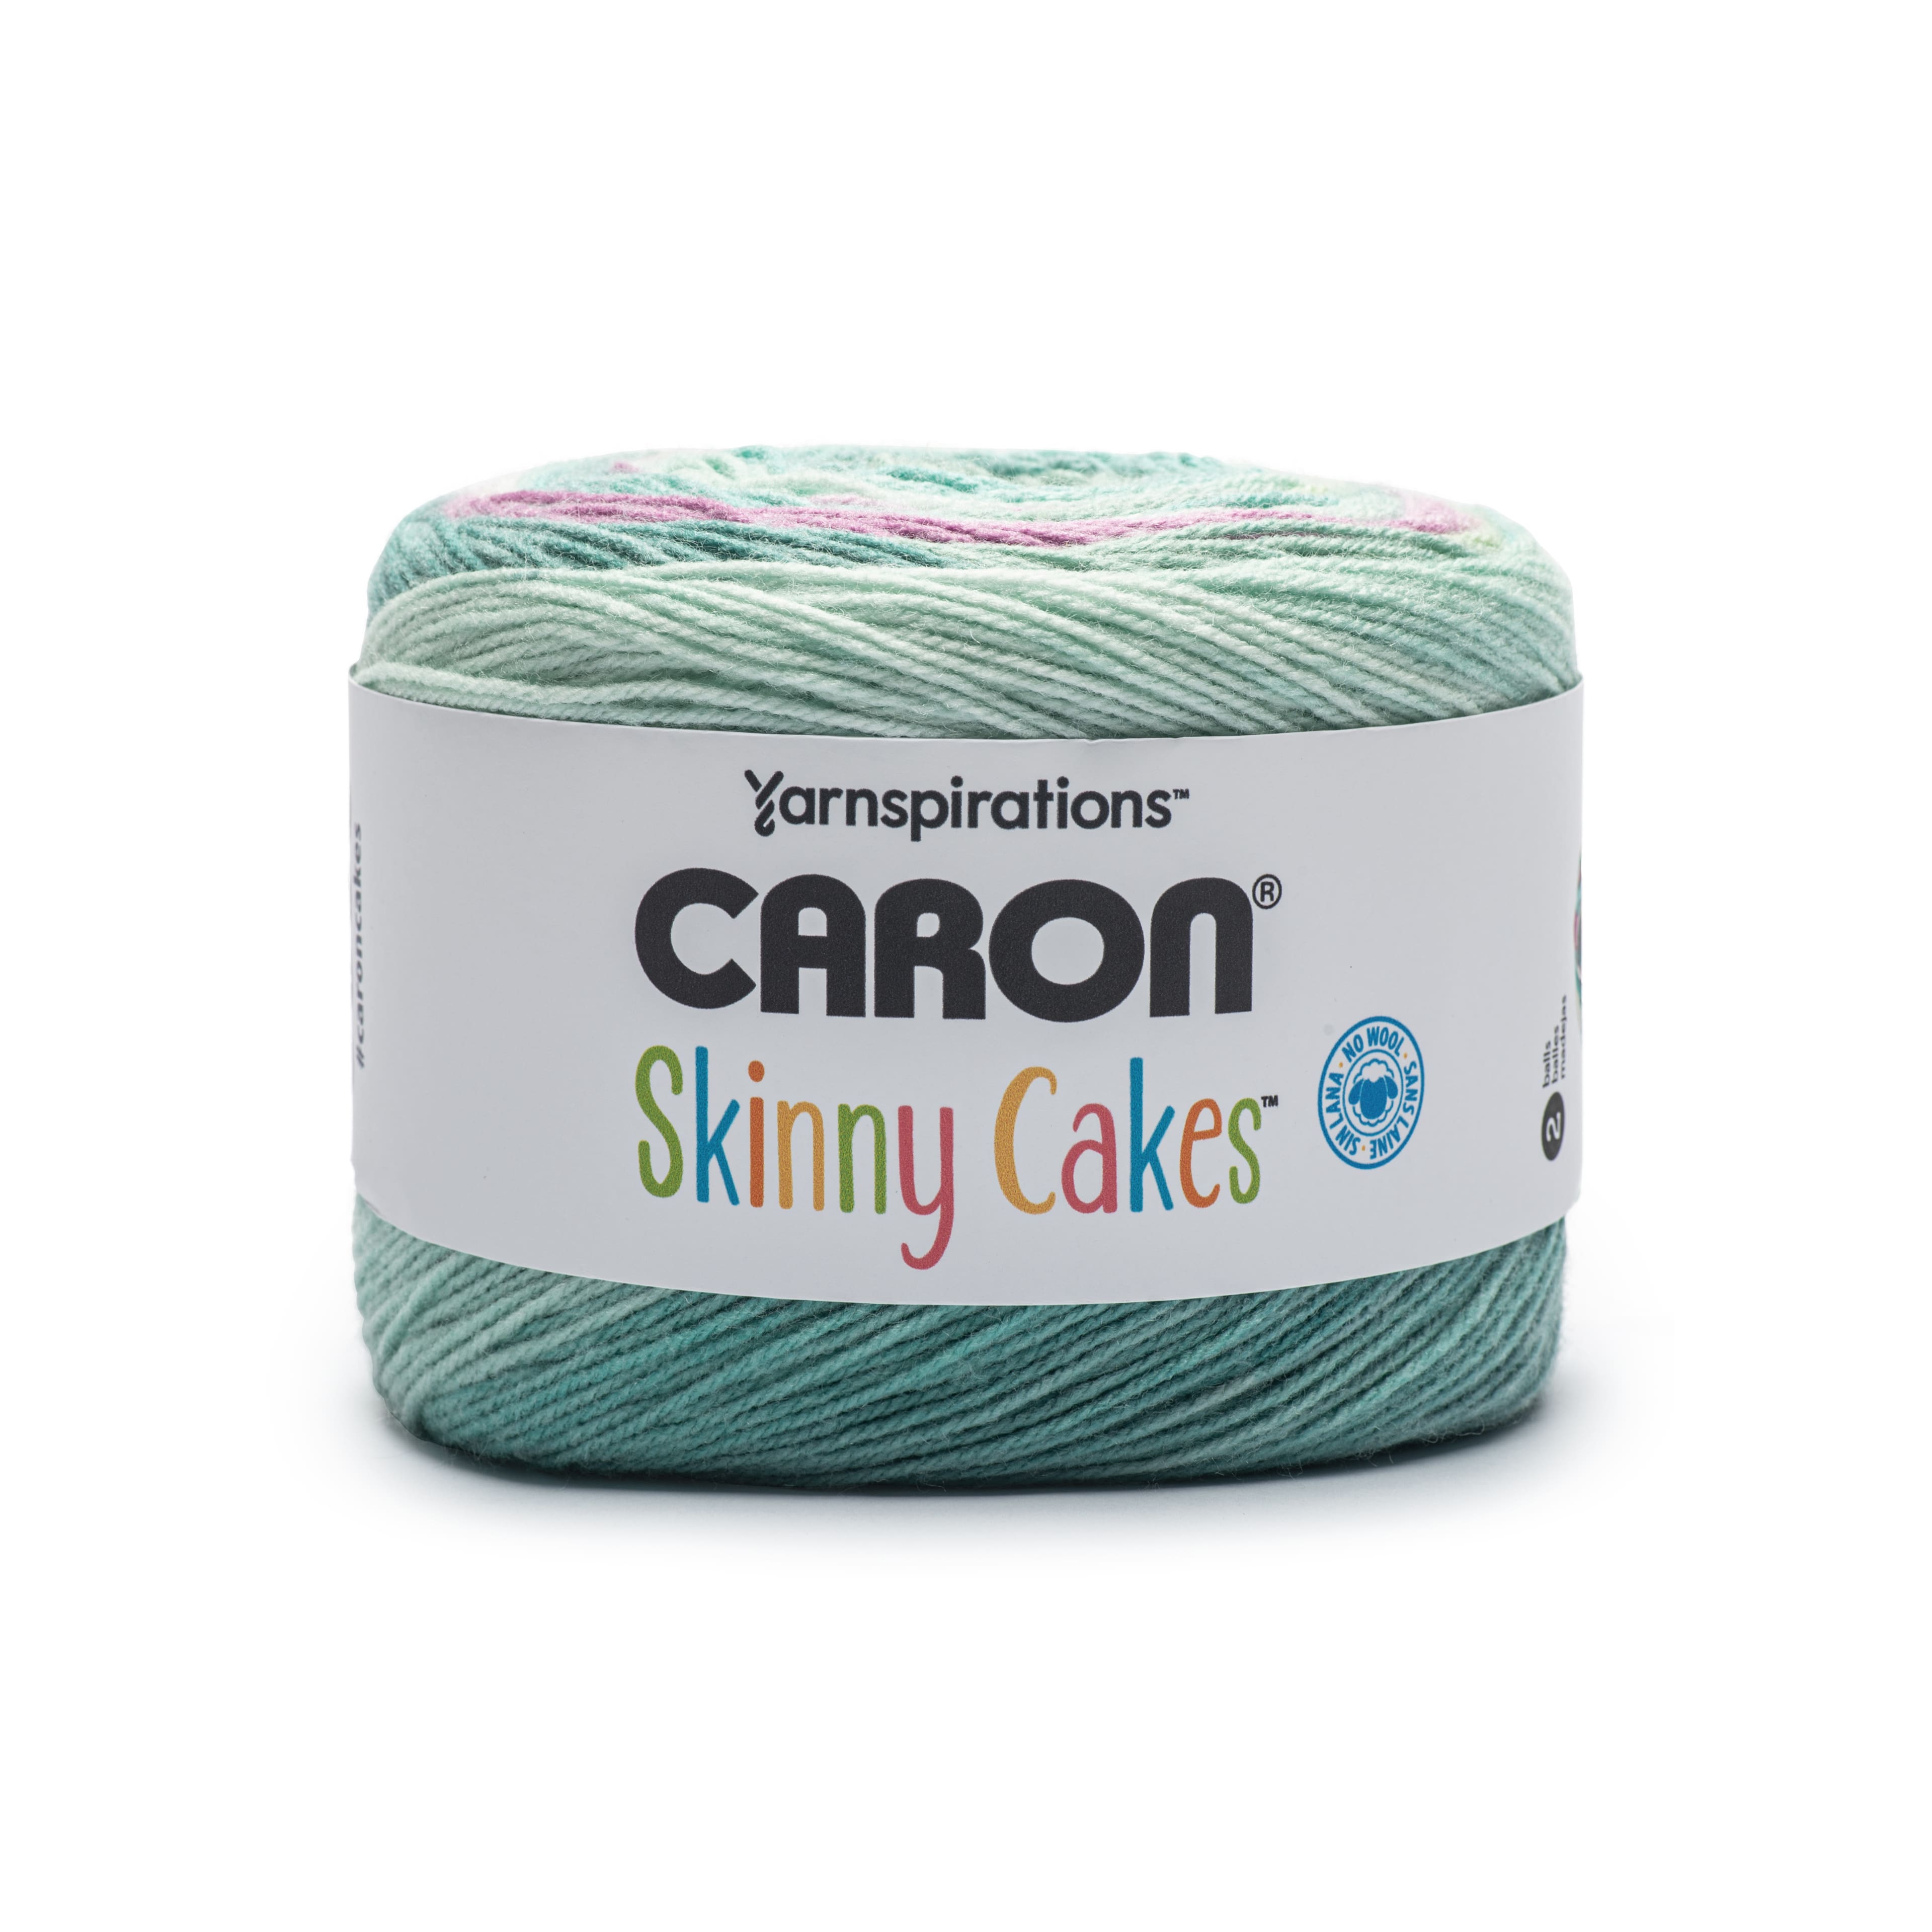 Caron Cakes 350m (1 stores) find the best prices today »